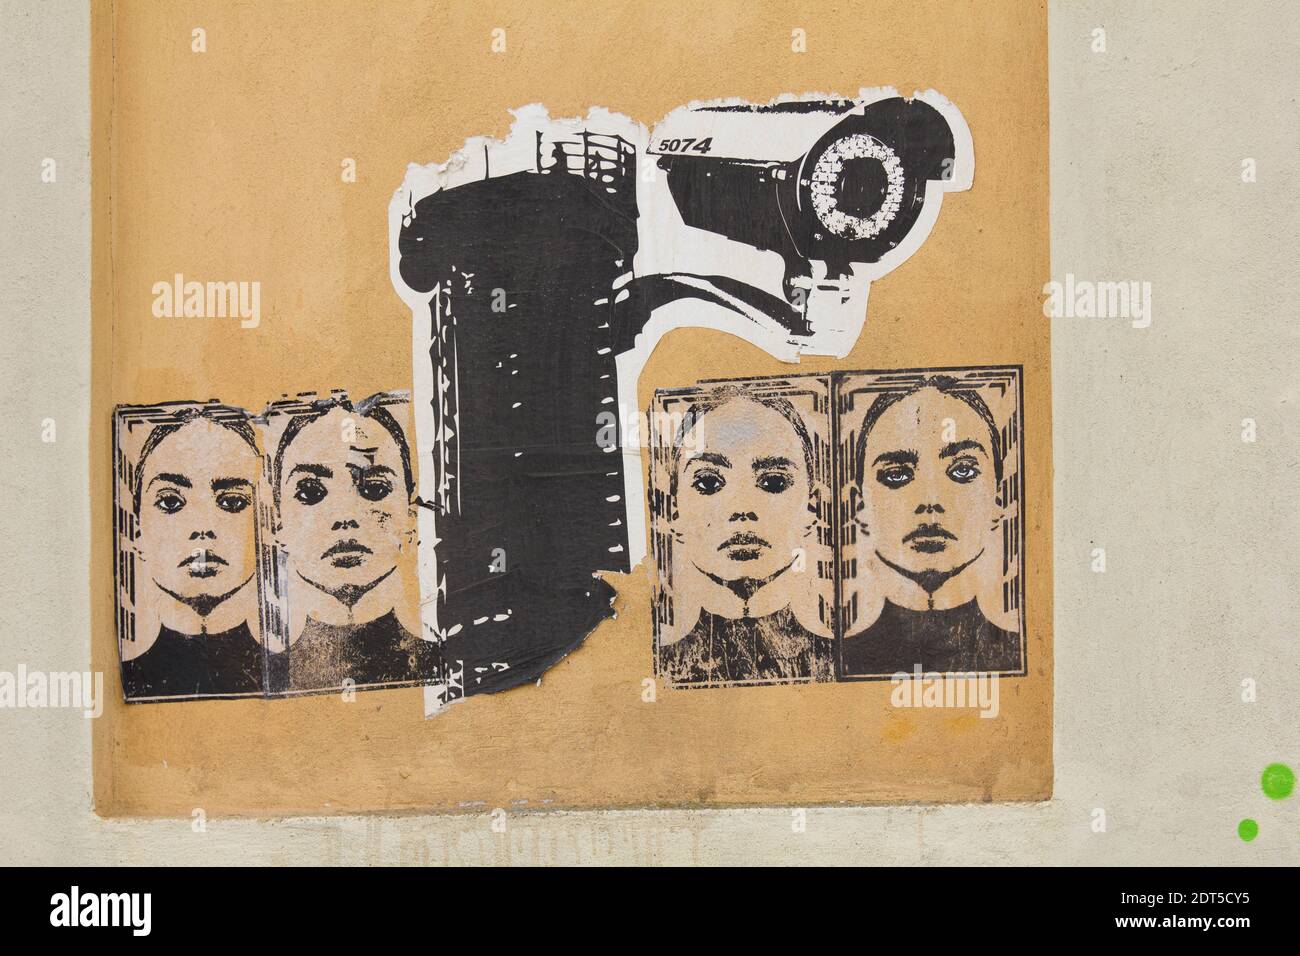 Graffiti cut outs pasted on a wall depicting a surveillance camera and female Stock Photo